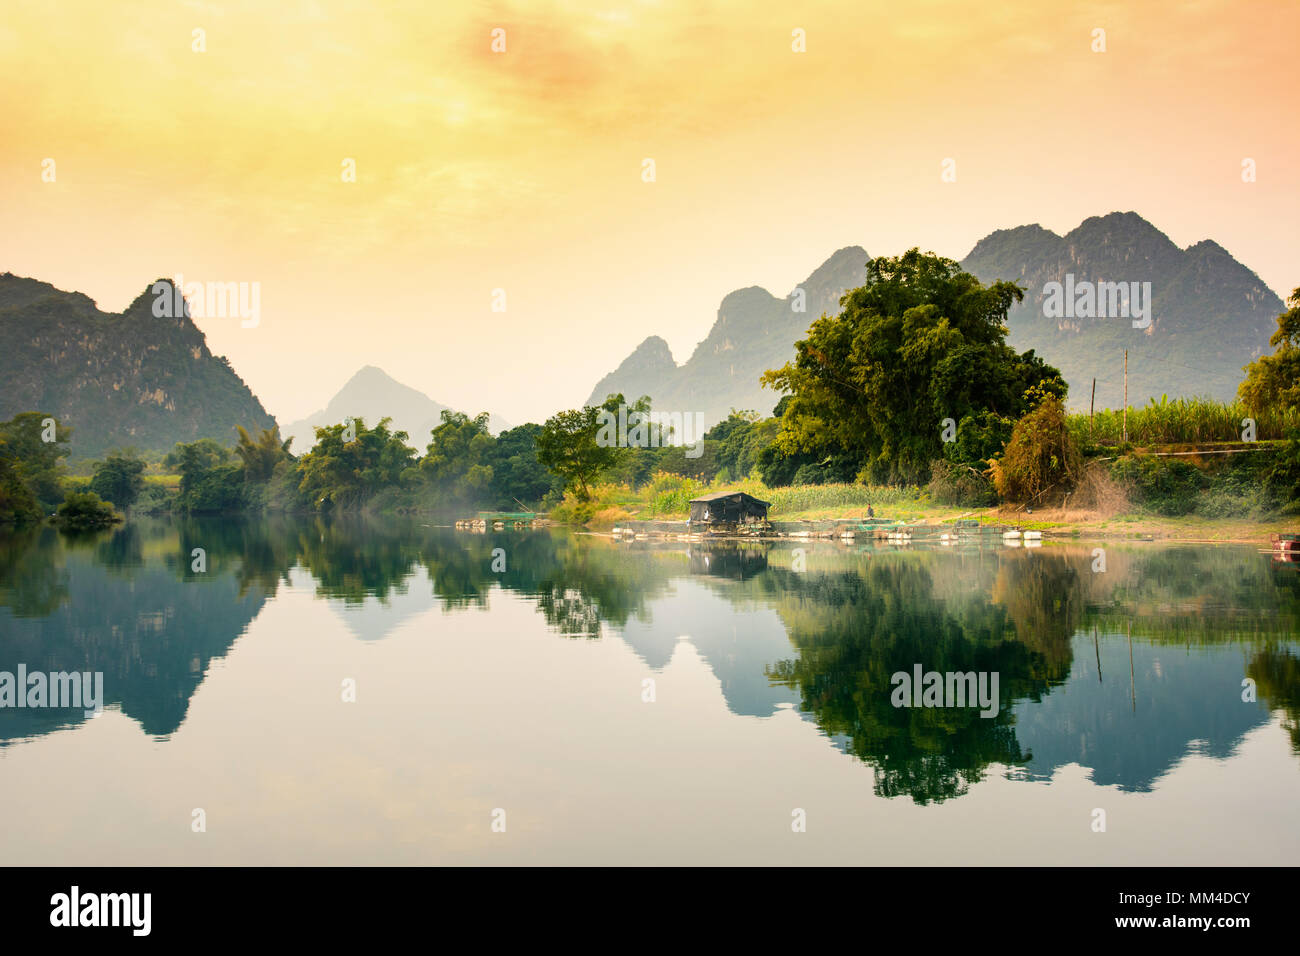 Scenic sunset over a lake in Guangxi province of China Stock Photo